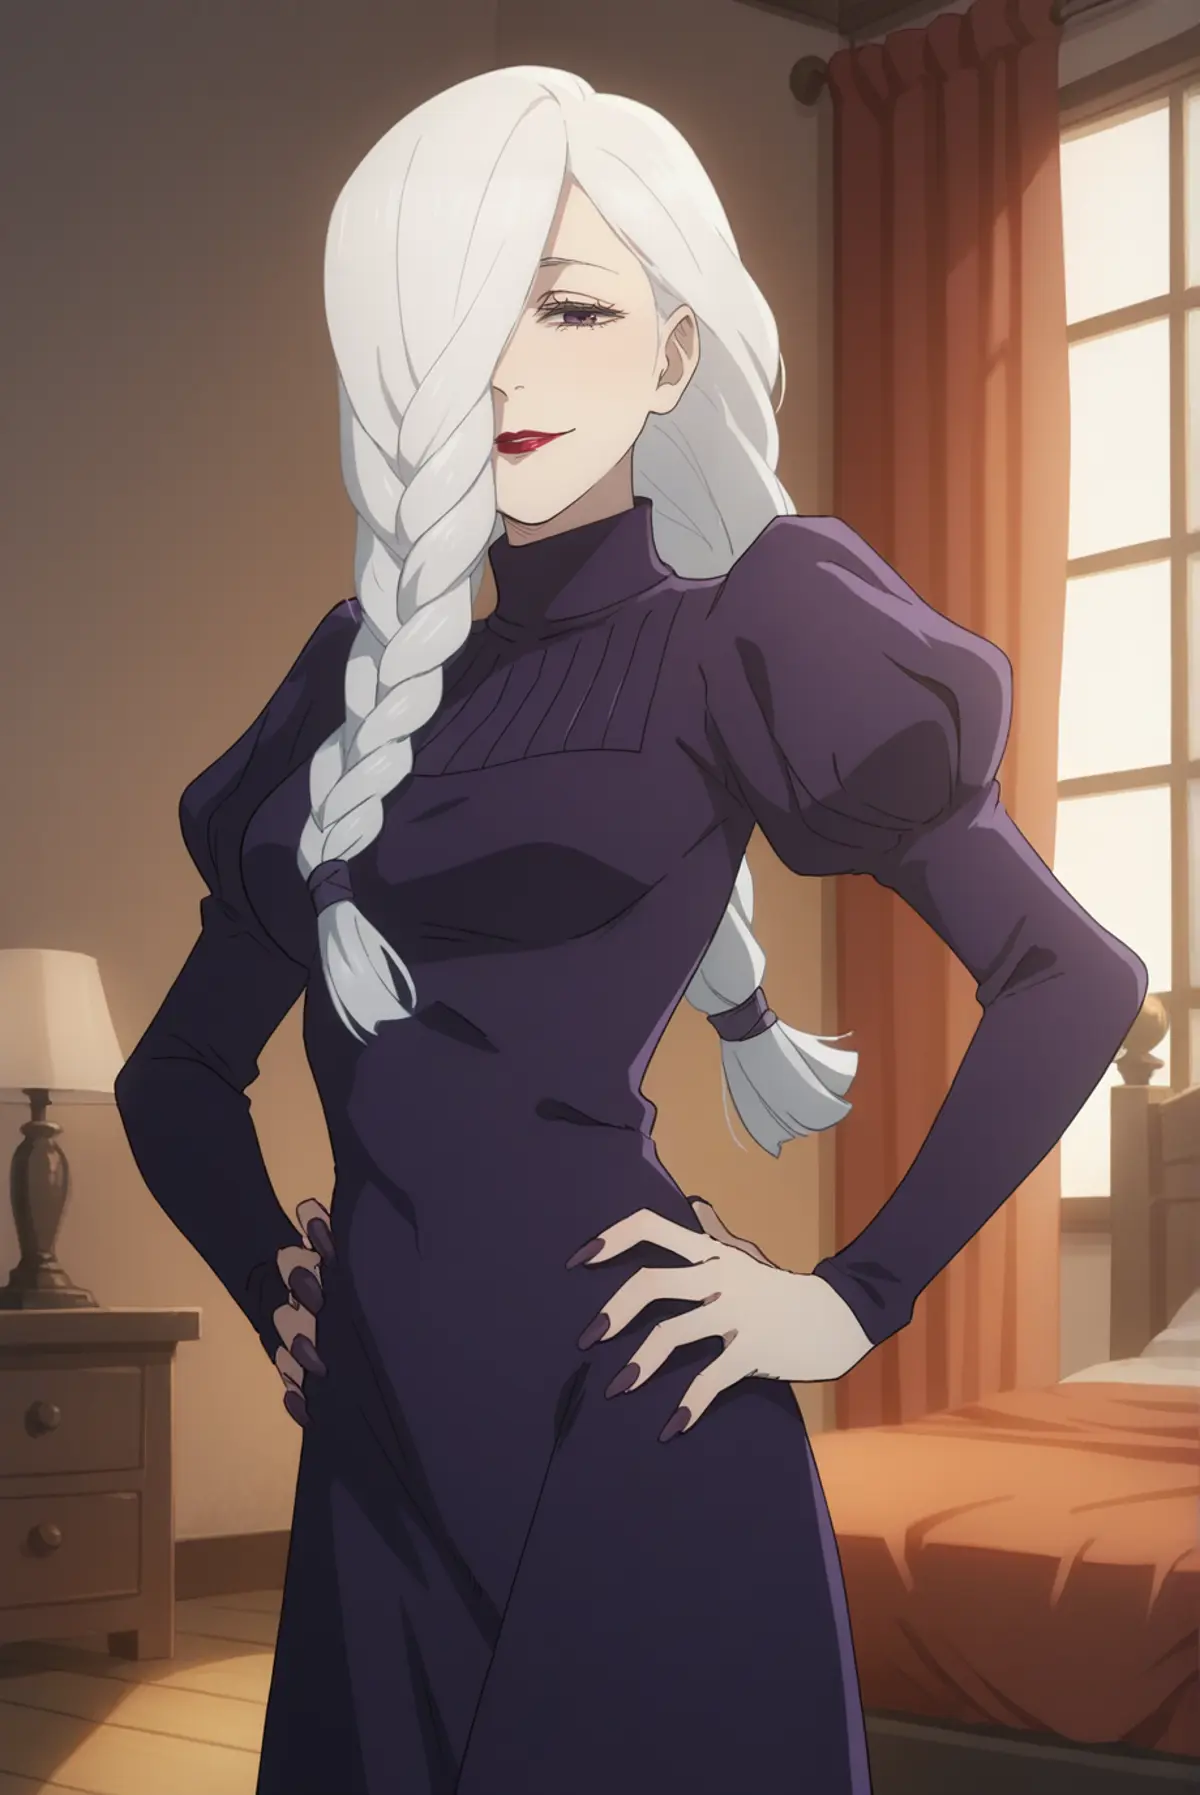 A woman with long, braided white hair standing confidently in a room with warm lighting. She is wearing a form-fitting, long-sleeved blue dress with a high collar and puffy shoulders. The background features a neatly made bed and a window with curtains drawn aside.